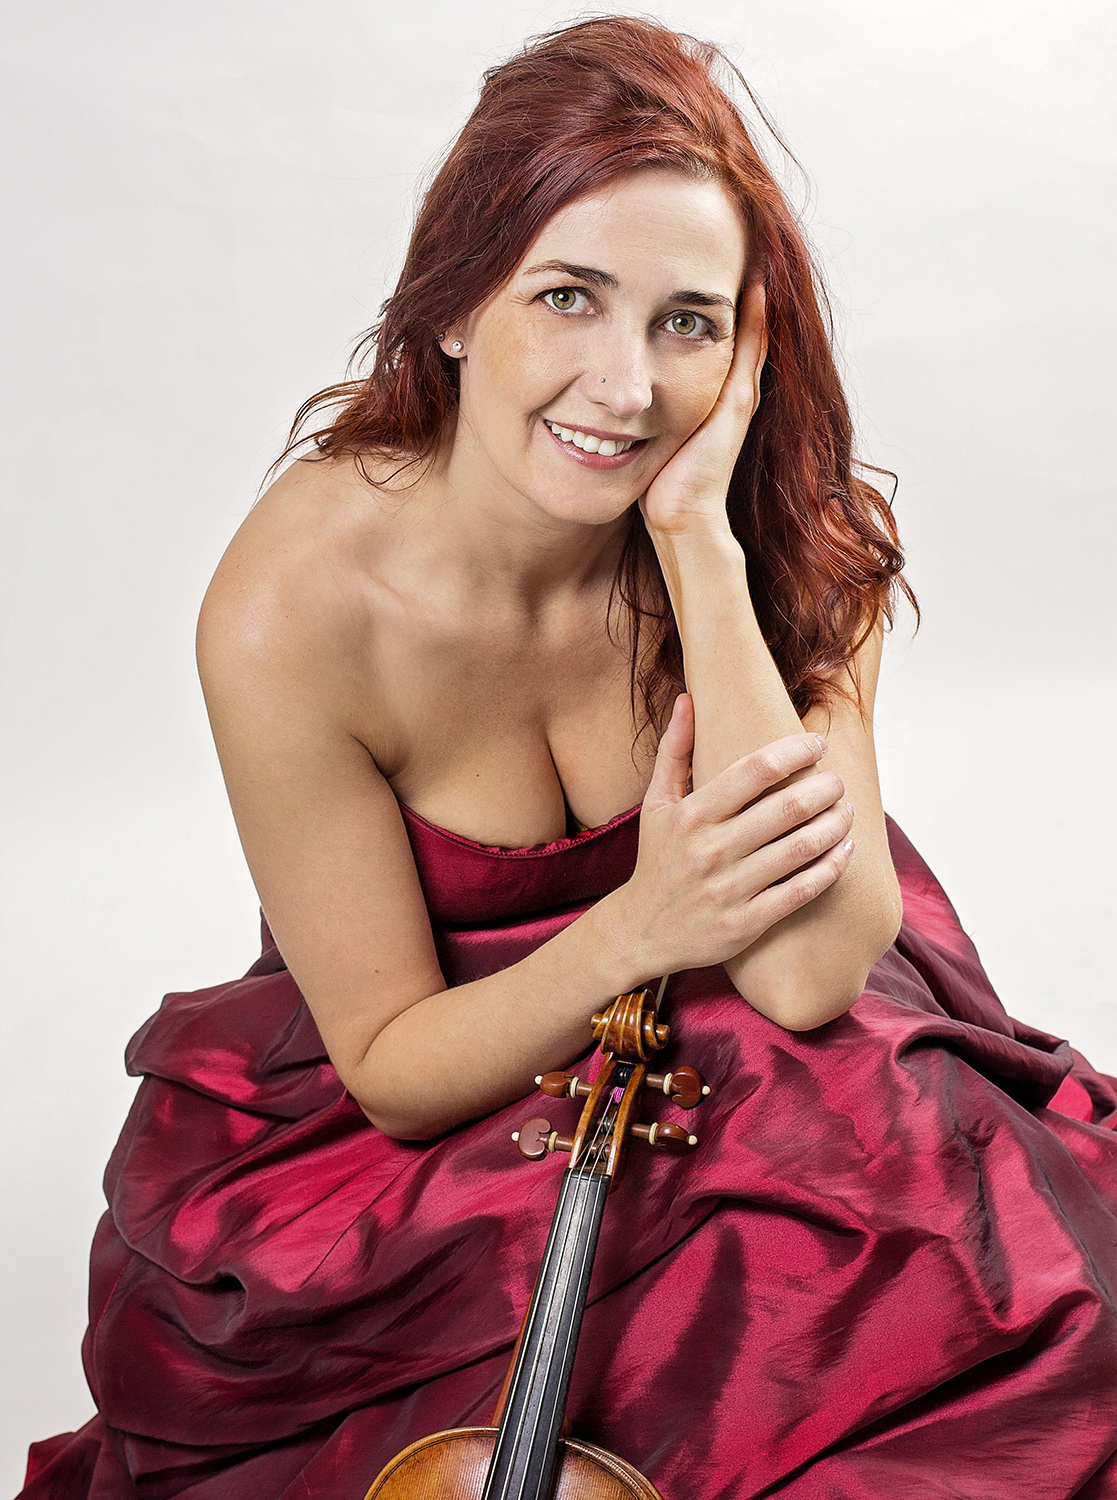 Rhiannon sitting in a red dress with her violin